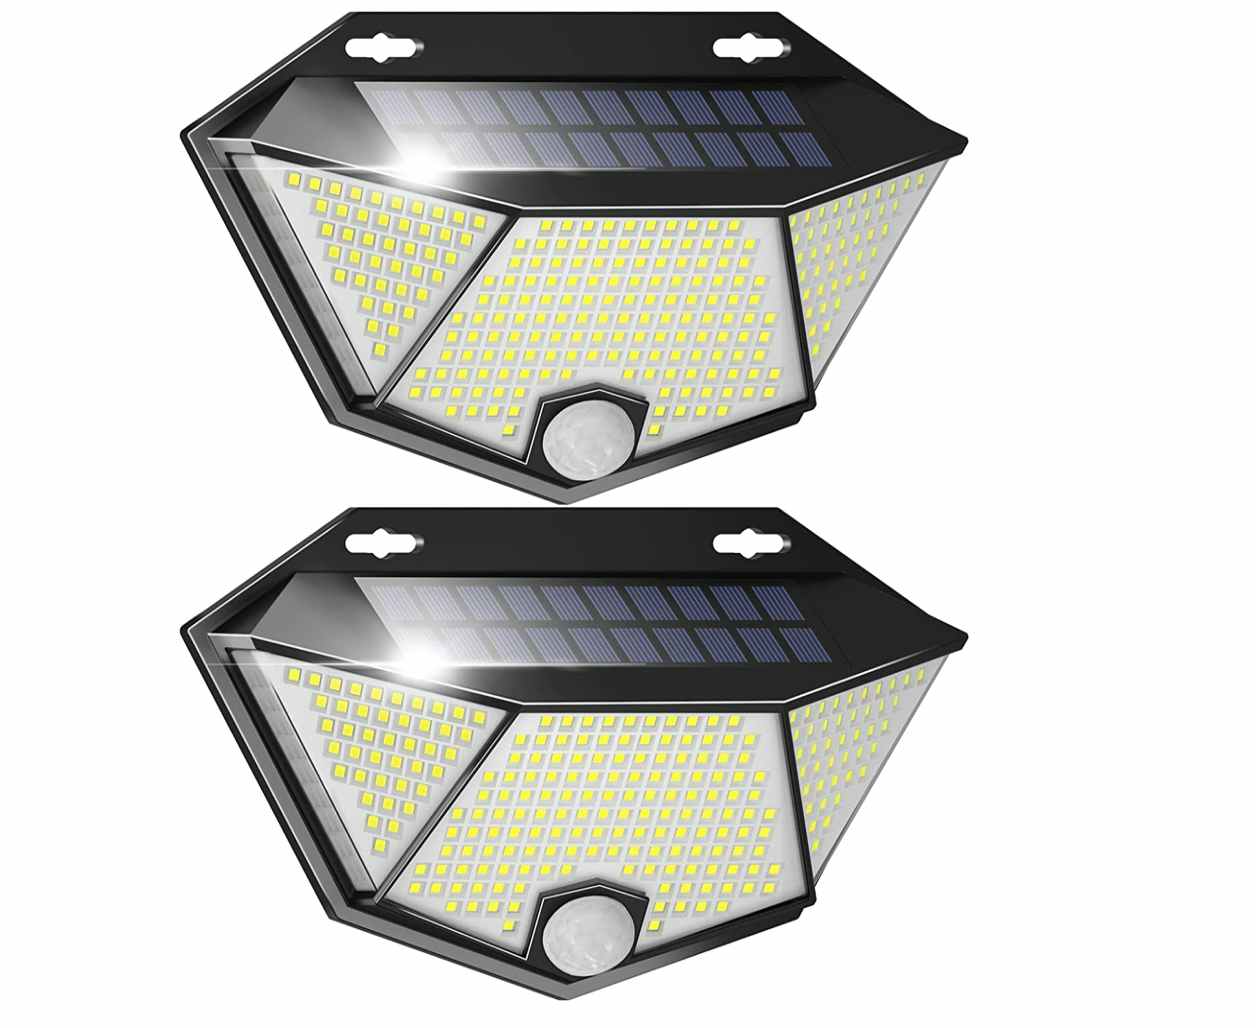 Two solar lights on a white background